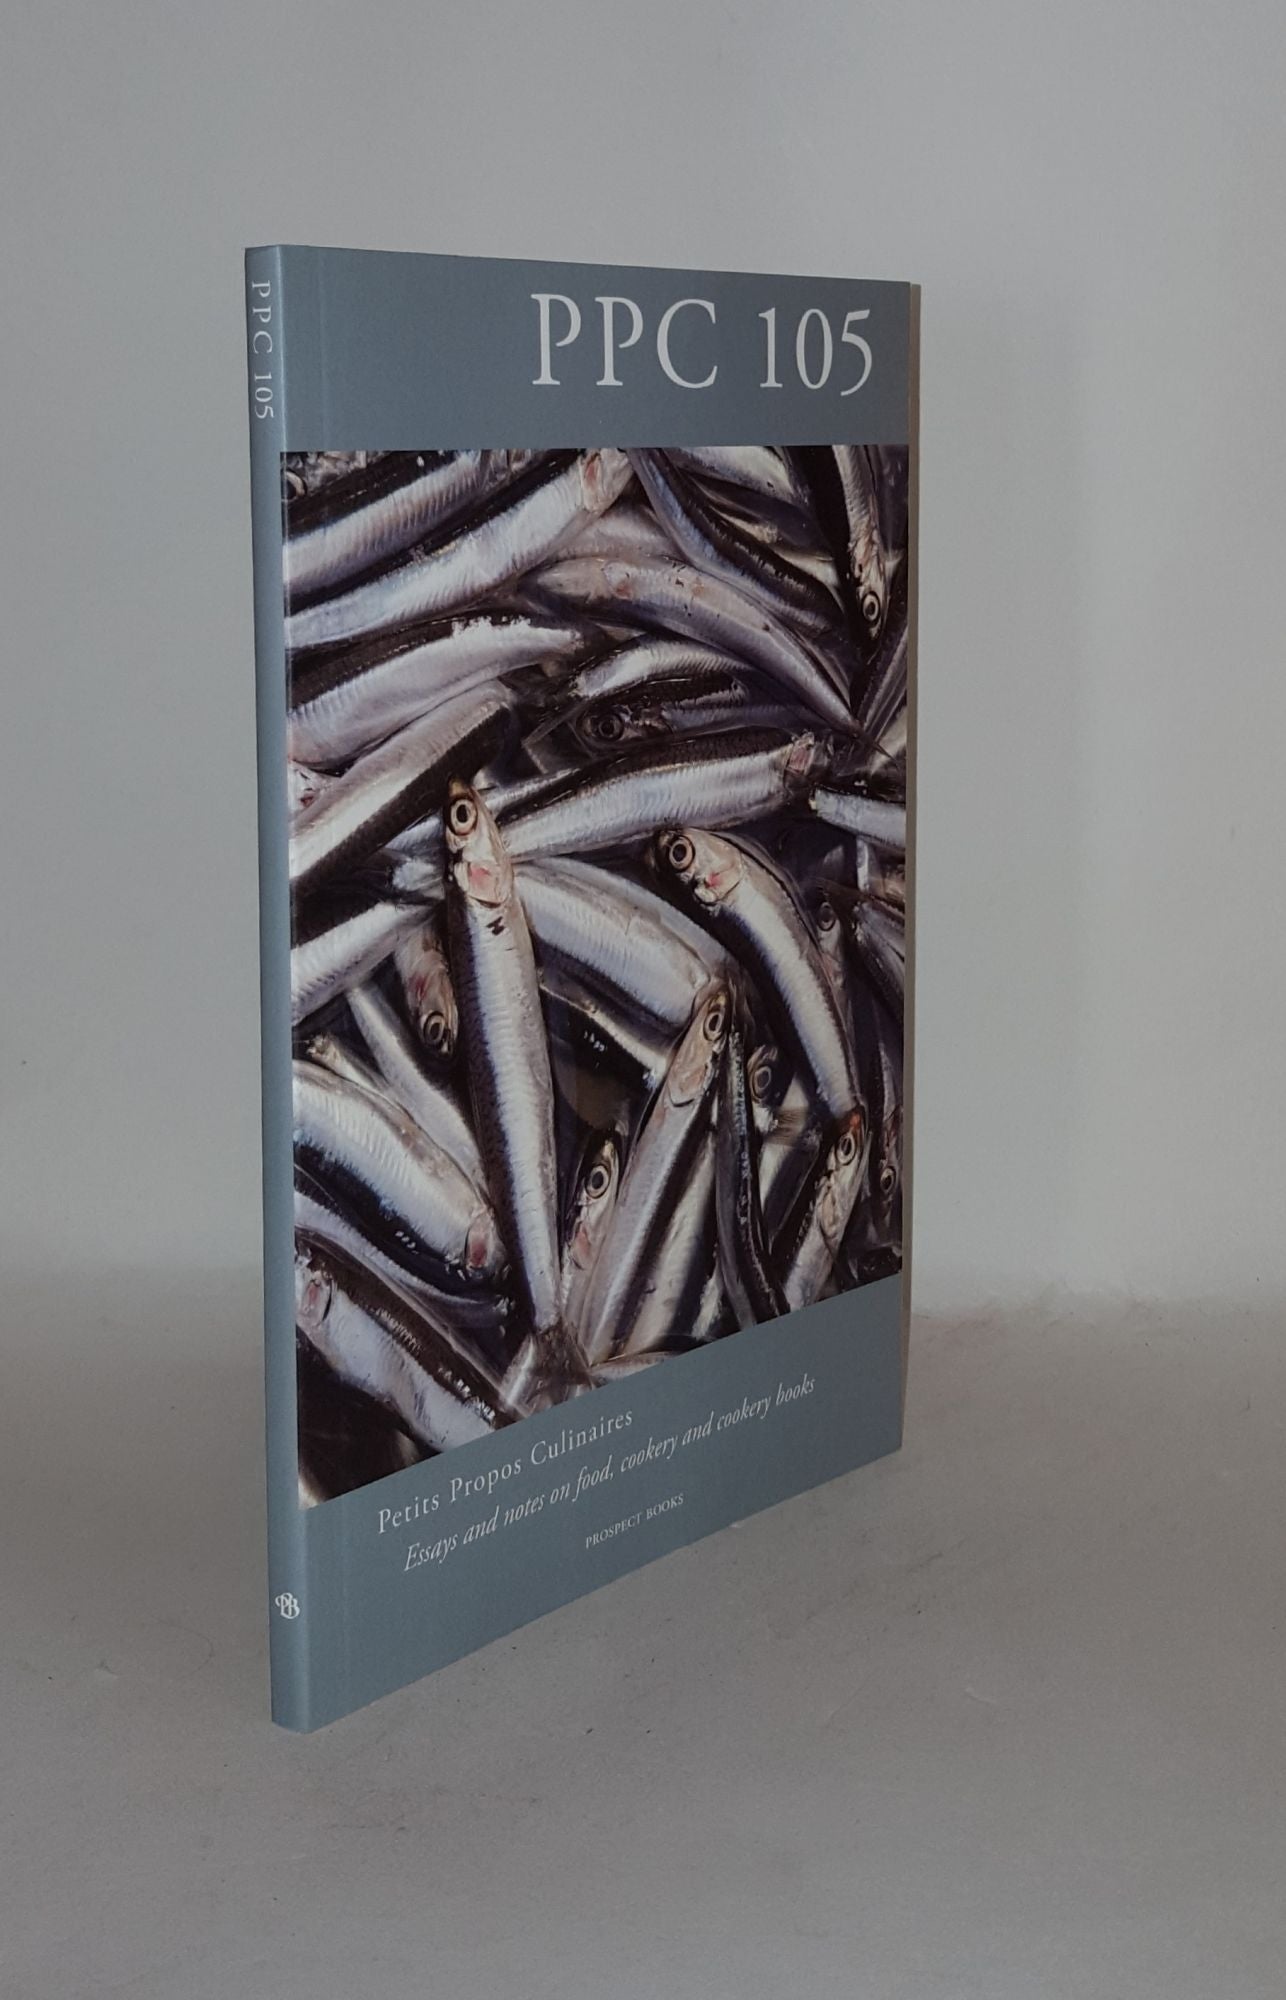 JAINE Tom - Petit Propos Culinaires Ppc 2 Essays and Notes on Food Cookery and Cookery Books